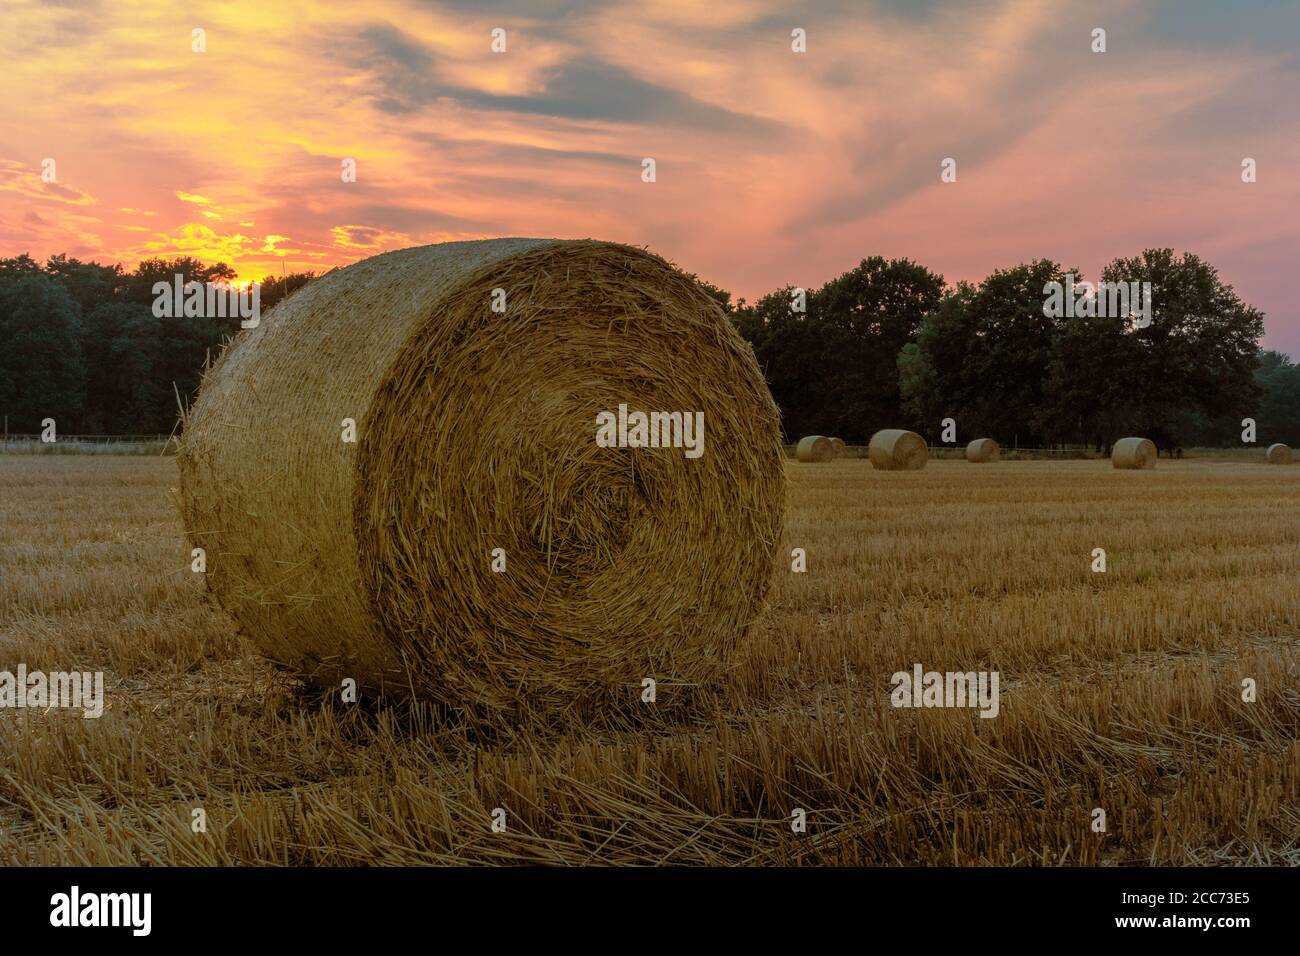 Straw roll on a grain field in sunset Stock Photo